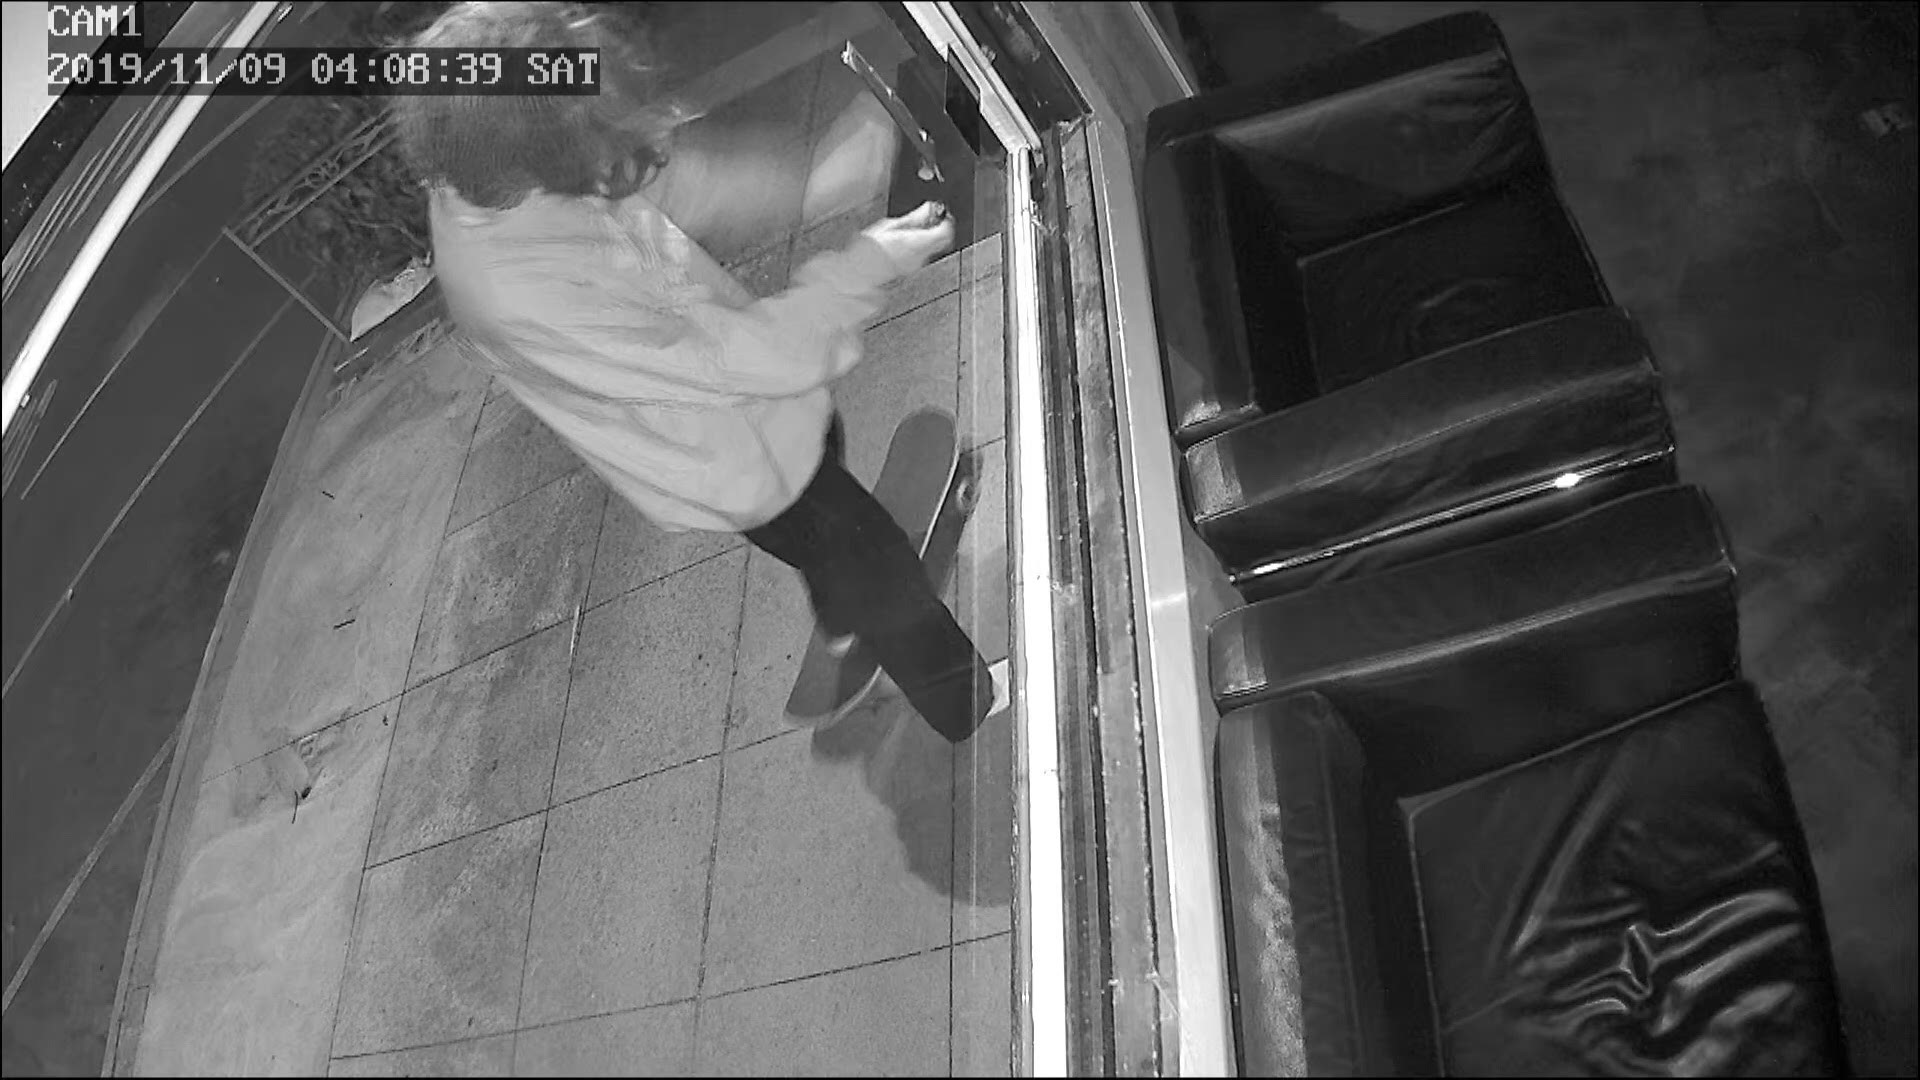 In surveillance footage, a man is seen riding up on a skateboard, attaching something on the front window, igniting a stick and then taking off before it explodes.